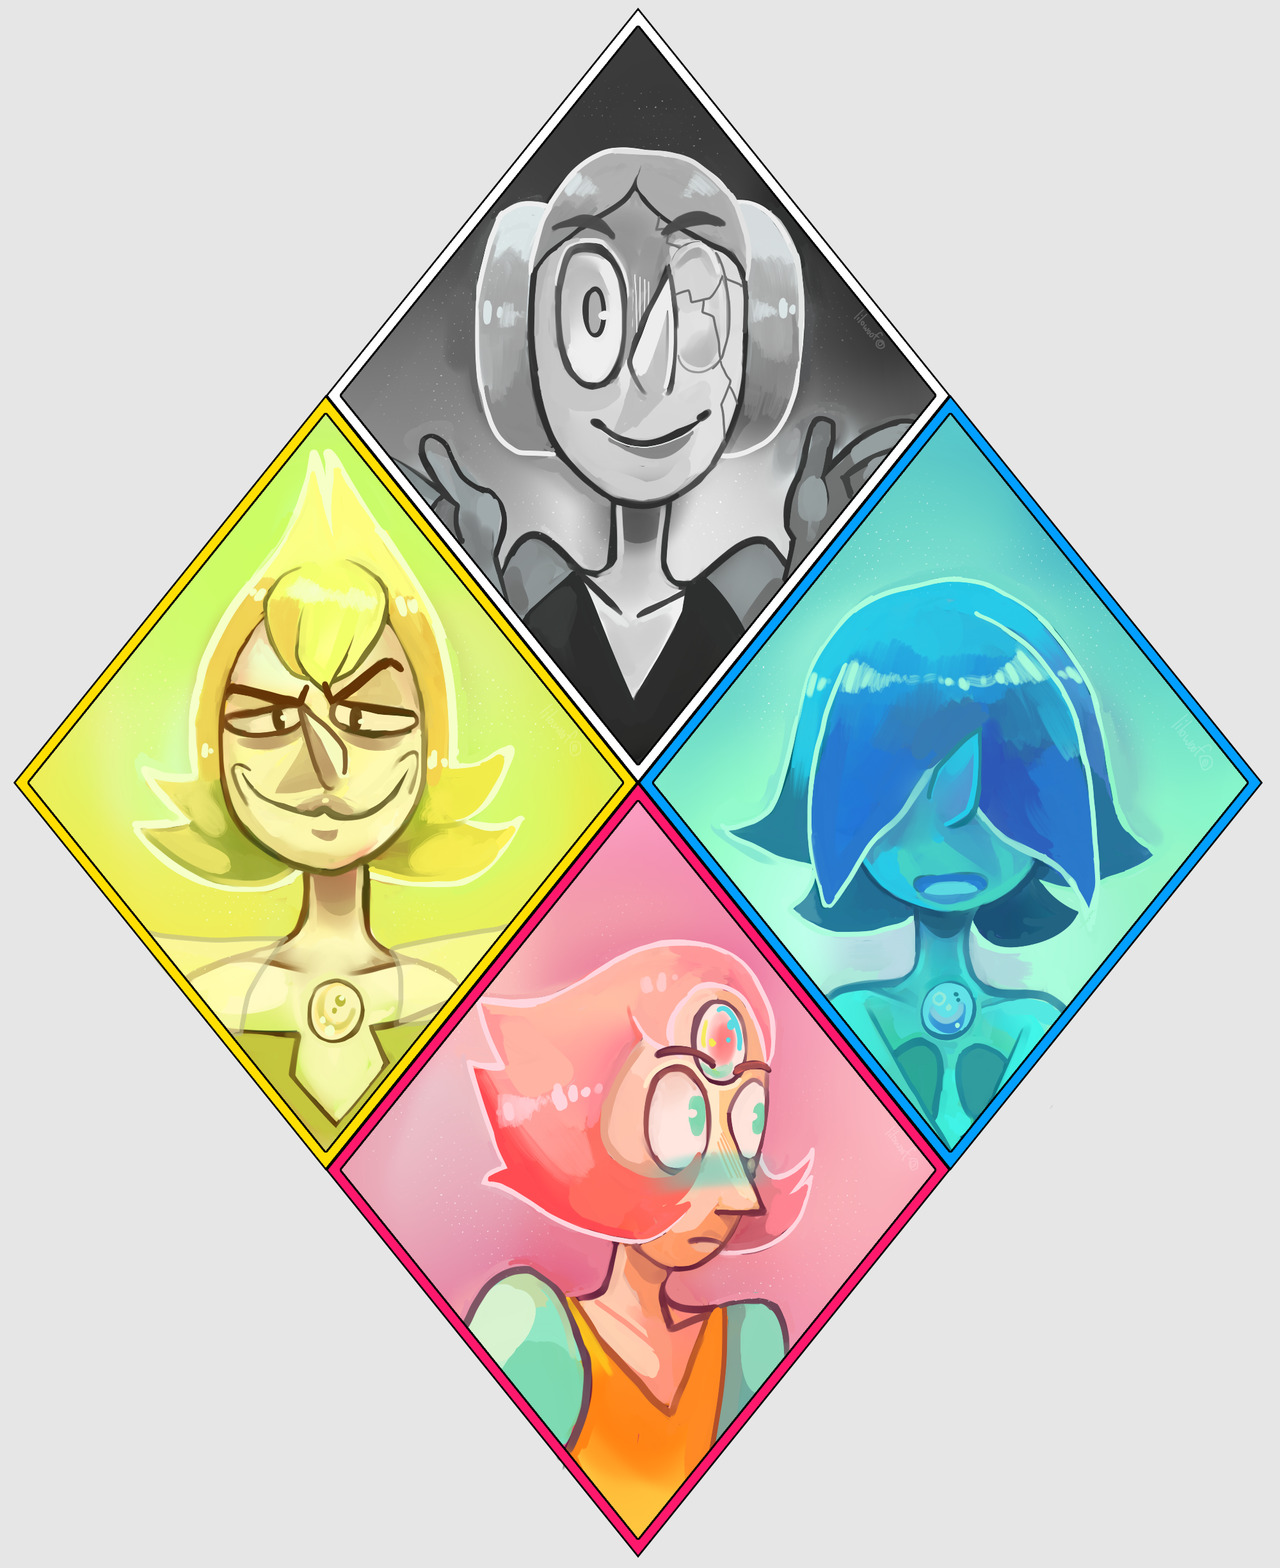 “Not all Pearls know each other, Steven. ”